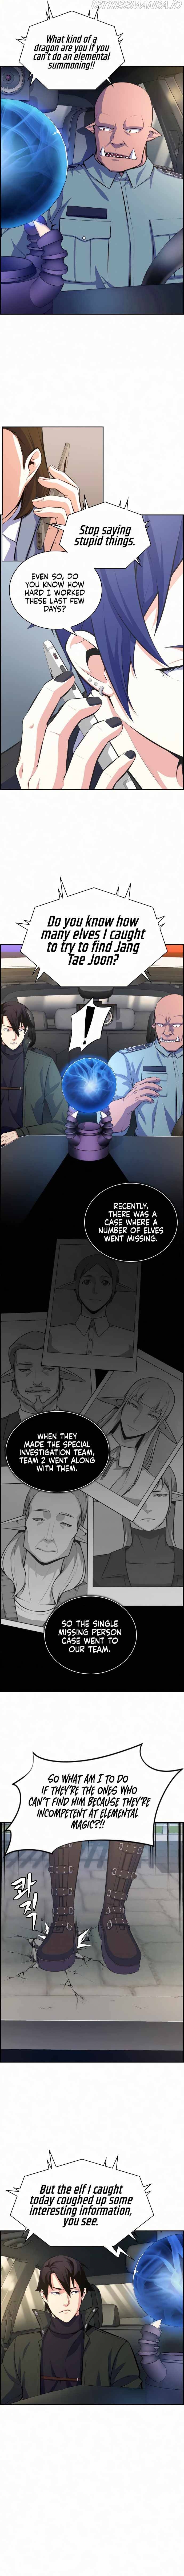 Foreigner on the Periphery Chapter 8 - Page 5